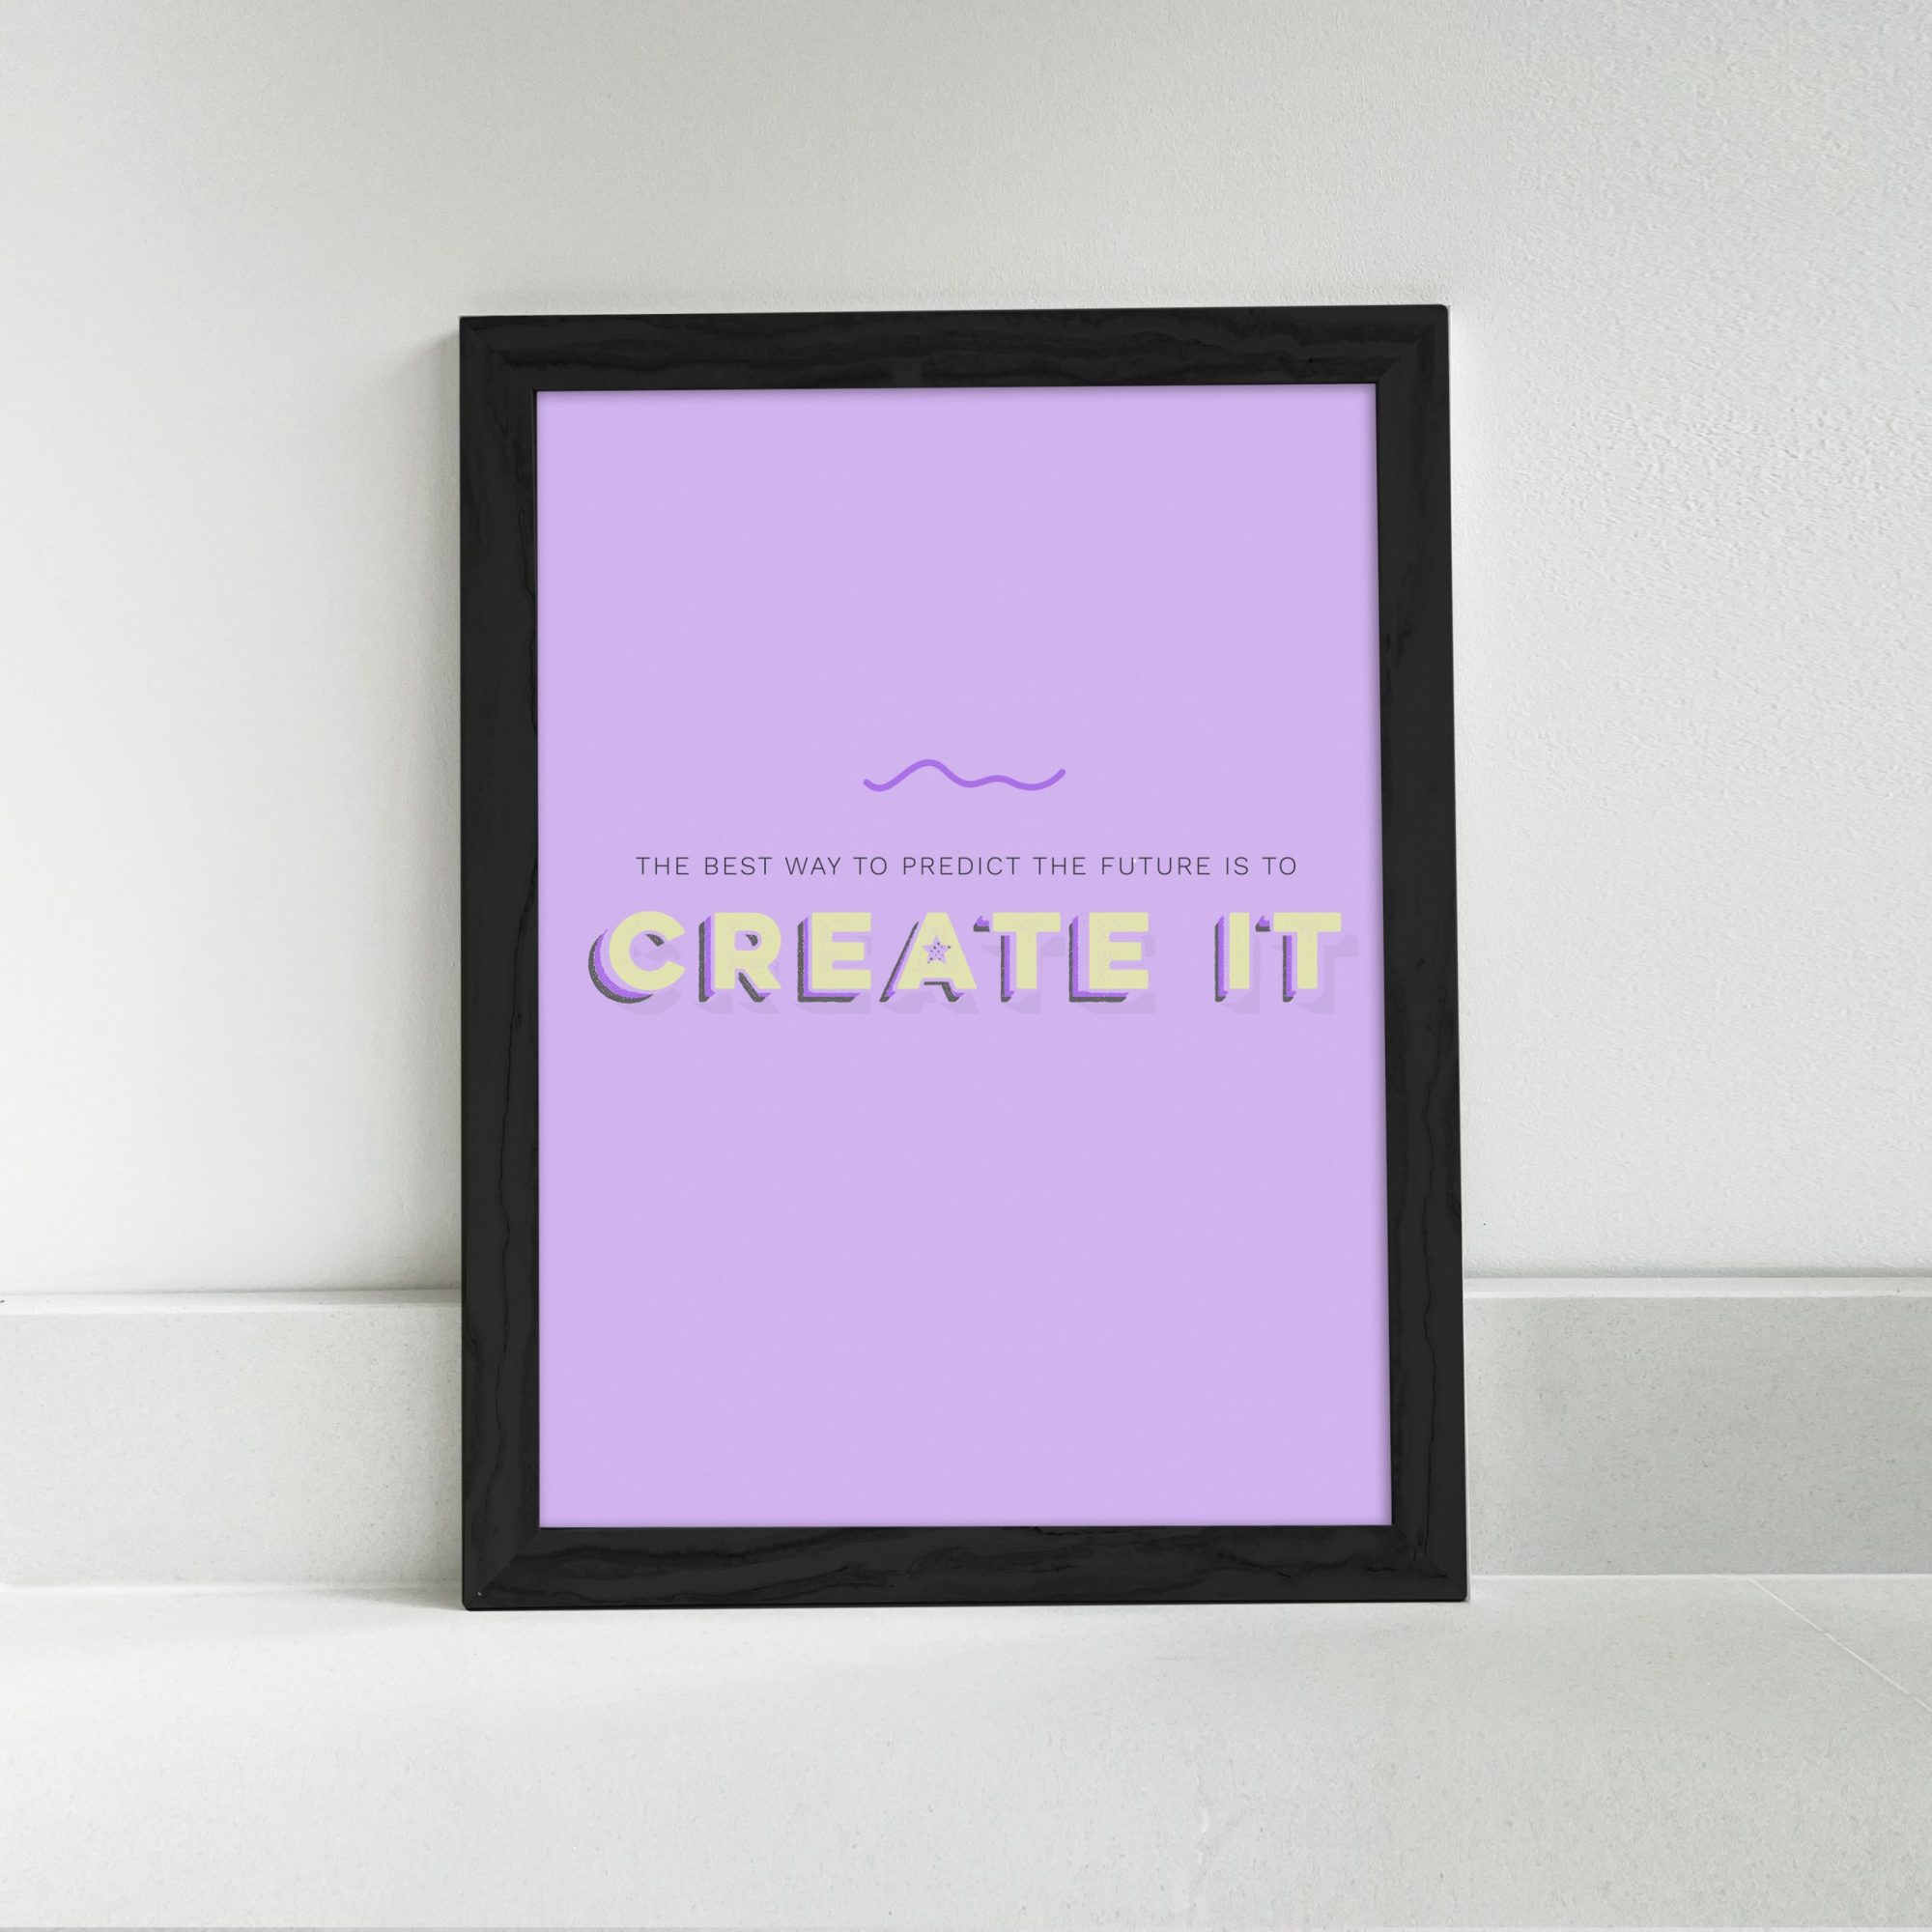 Powerful business quotes: The best way to predict the future is to create it - purple